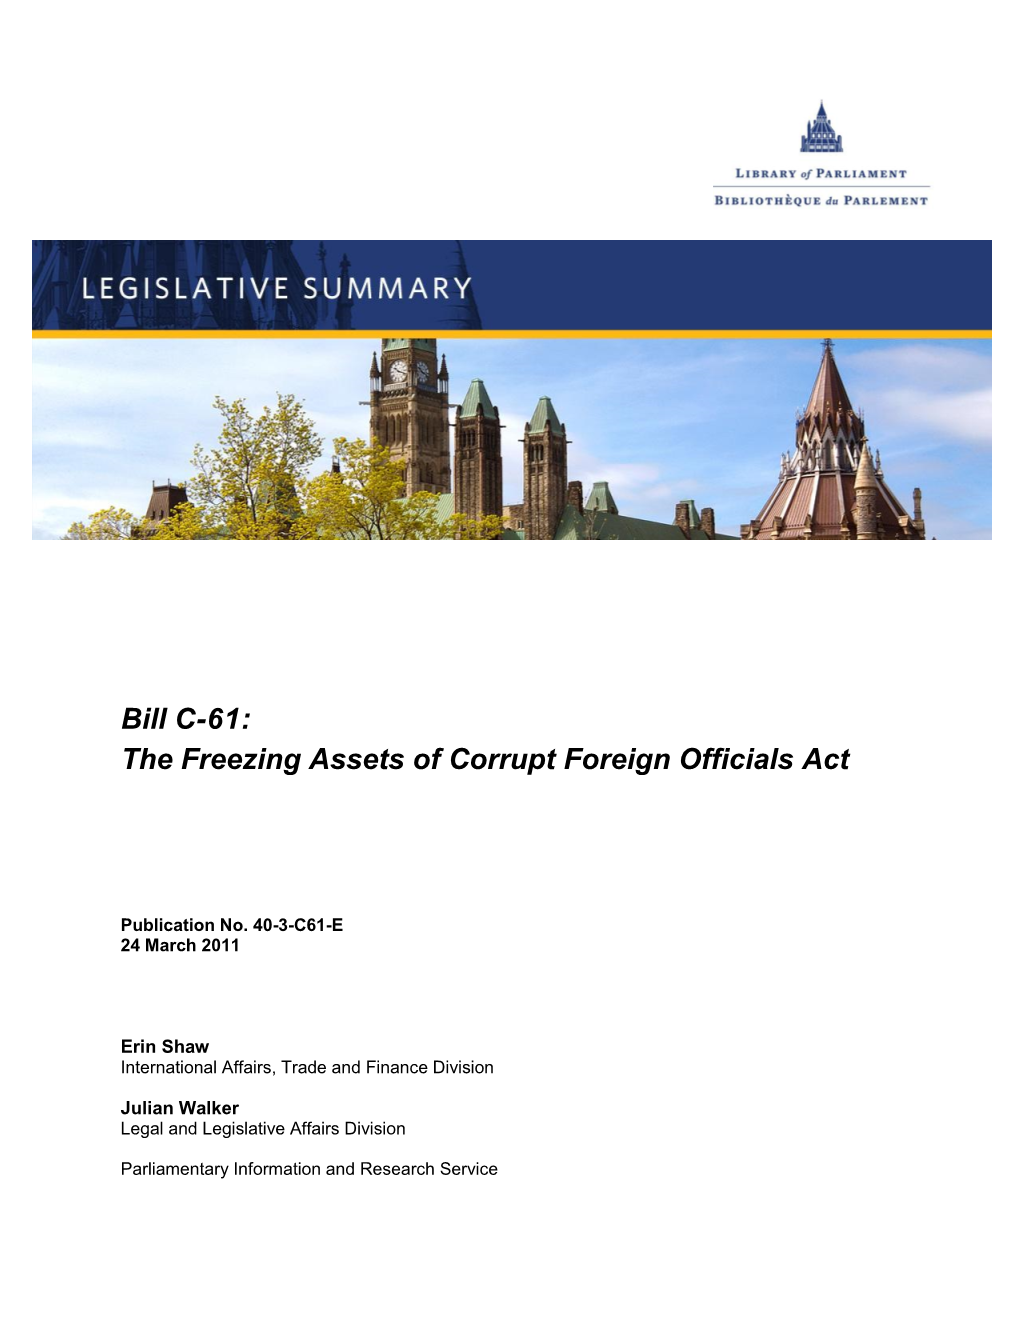 Bill C-61: the Freezing Assets of Corrupt Foreign Officials Act